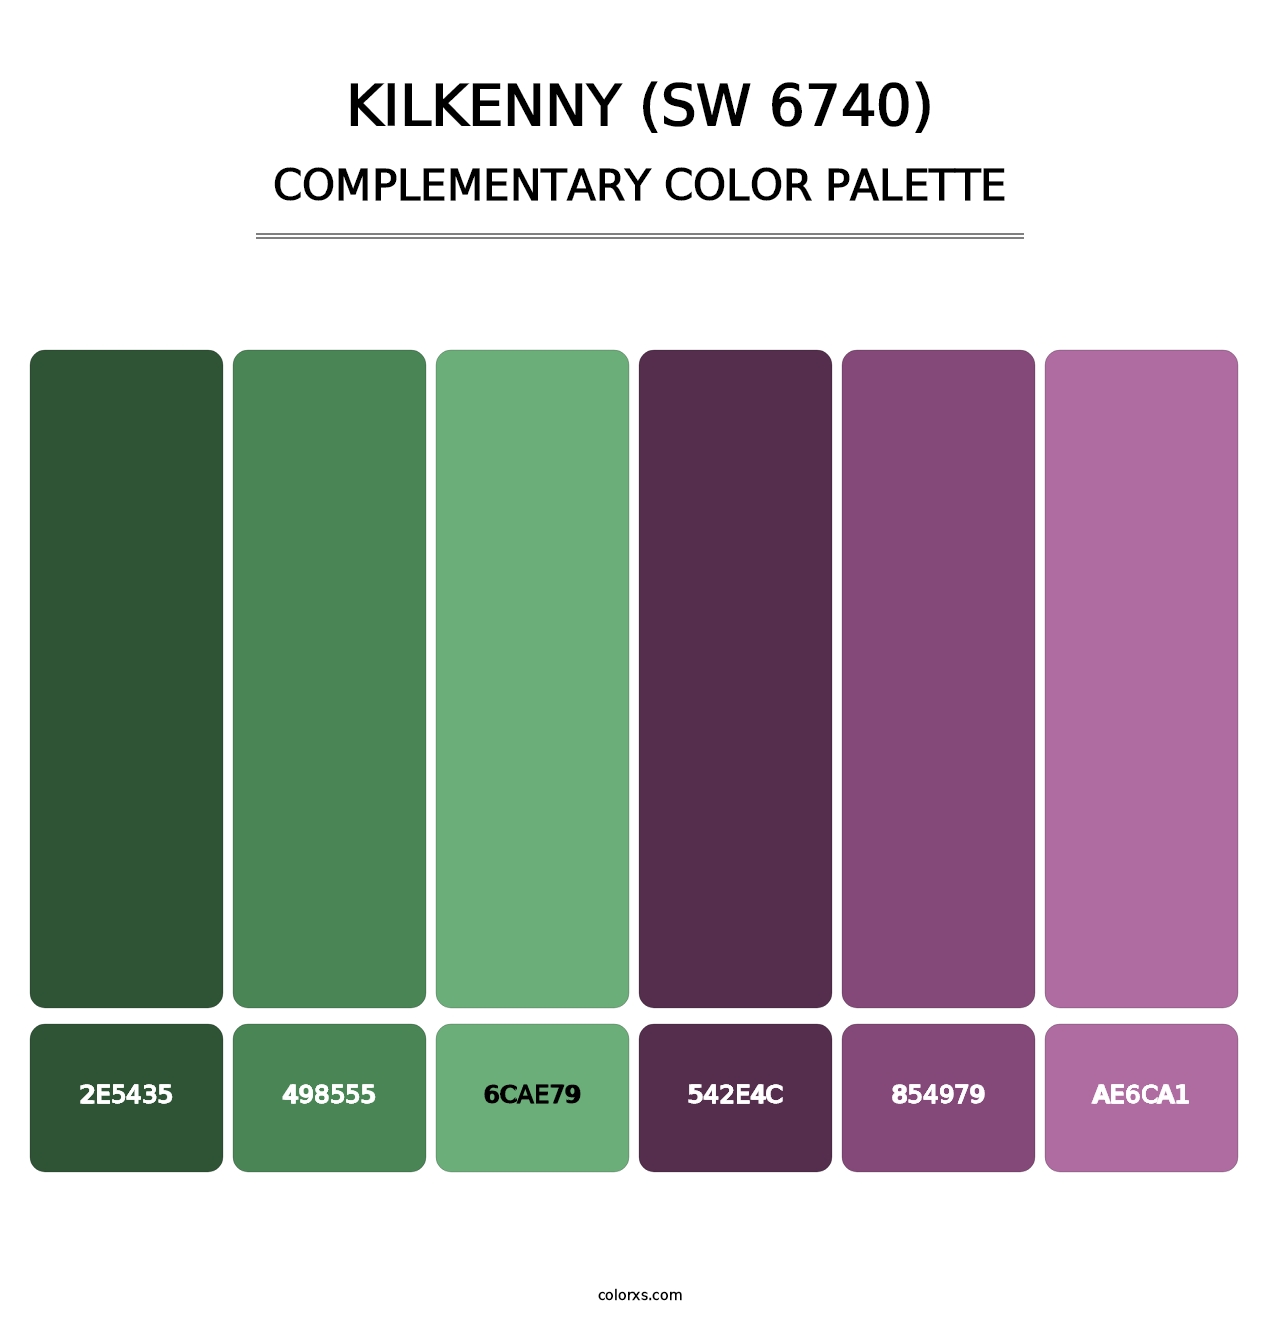 Kilkenny (SW 6740) - Complementary Color Palette